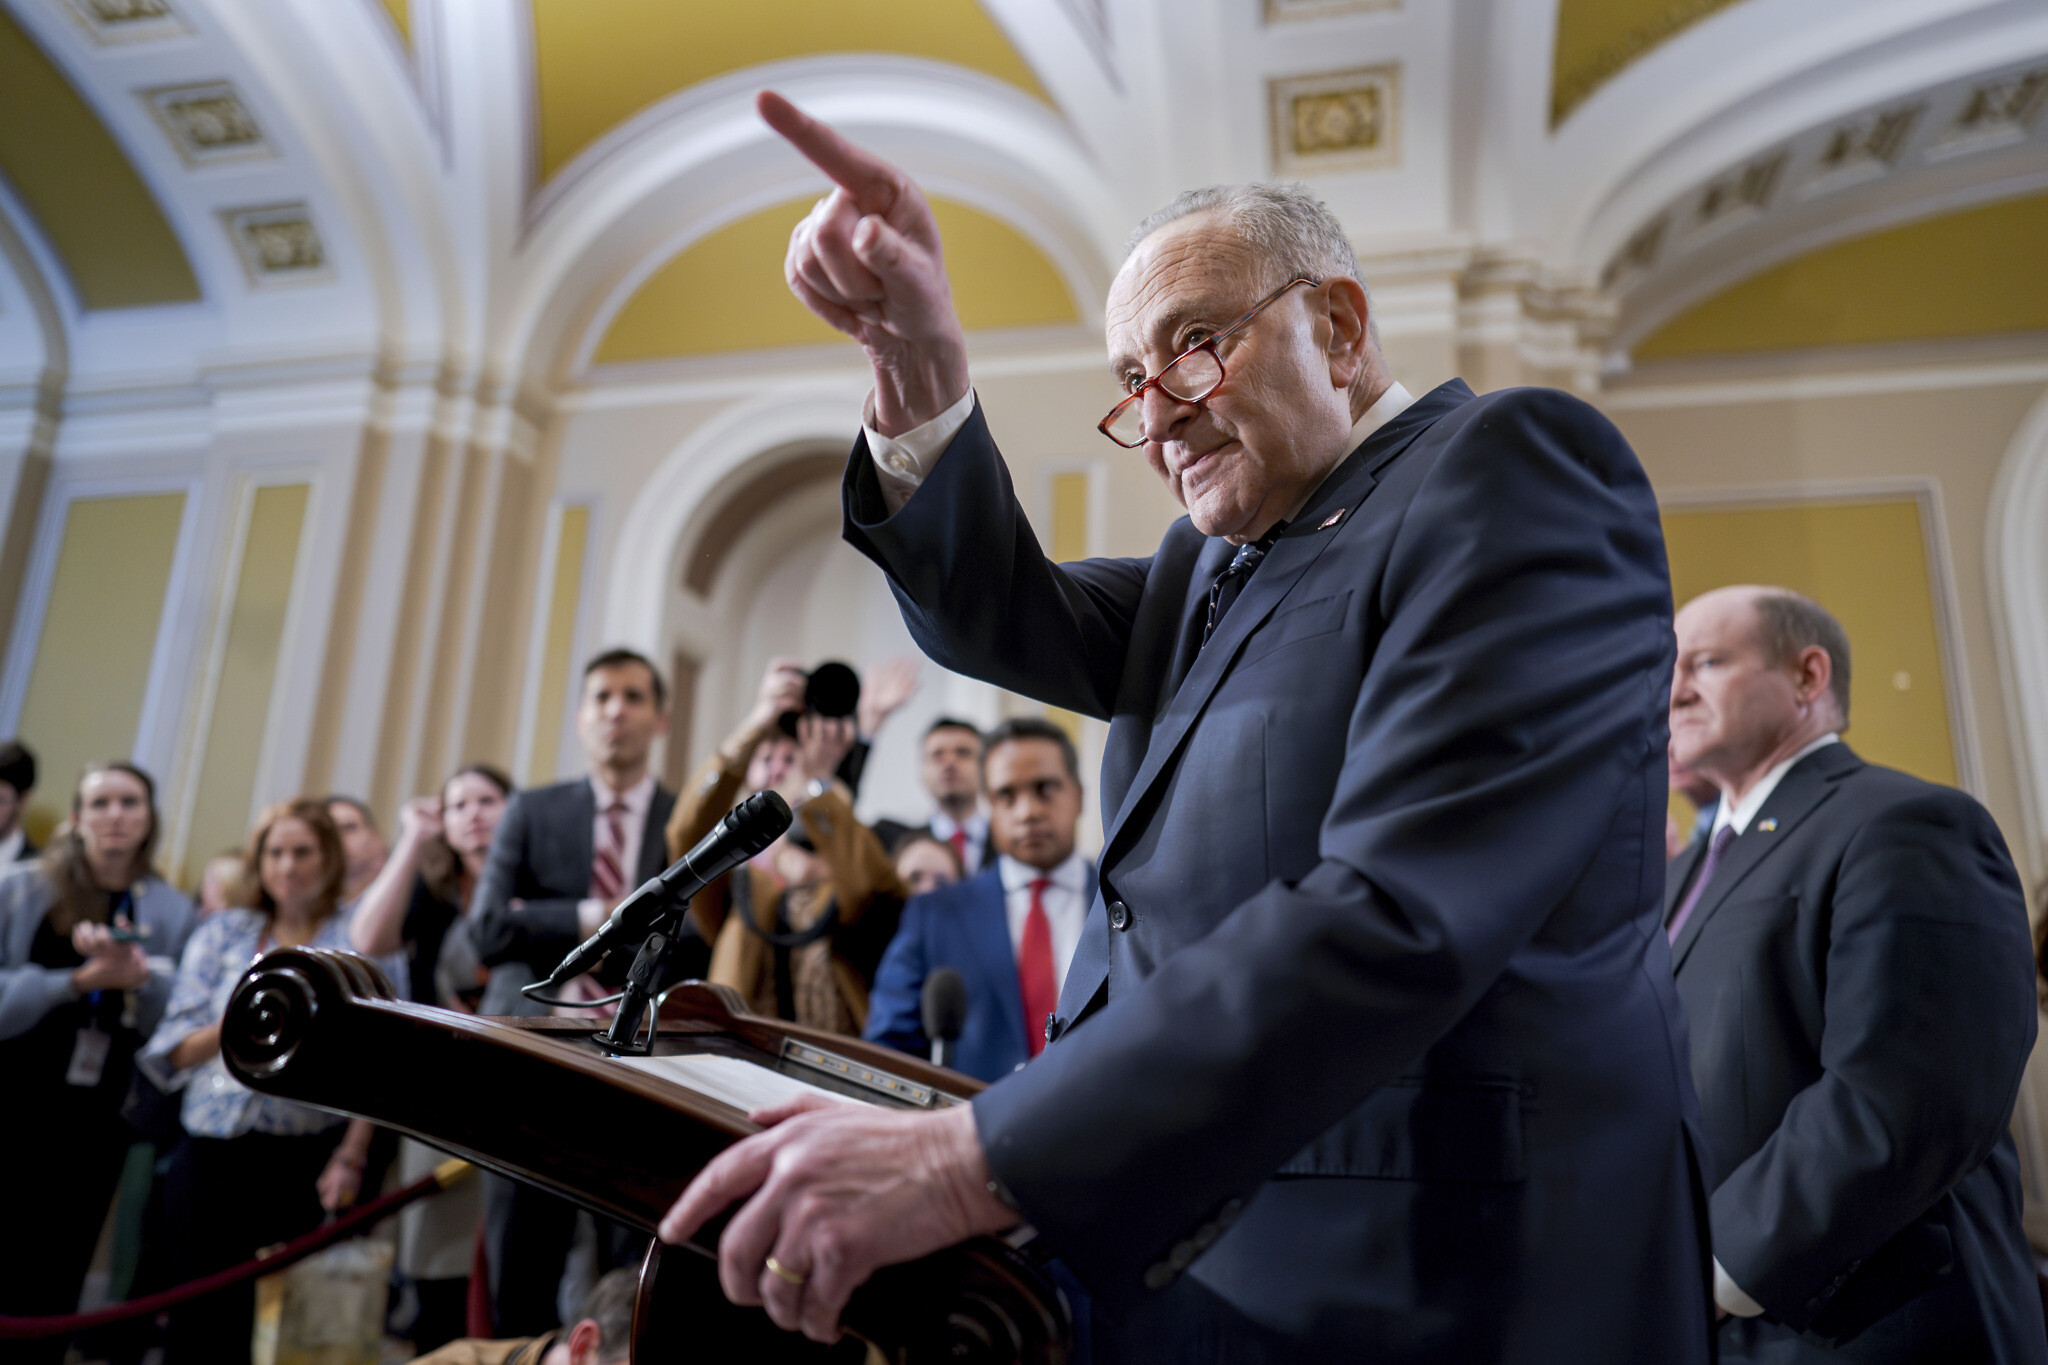 Senate leaders express bipartisan support for Ukraine (Credits: AP Photo)